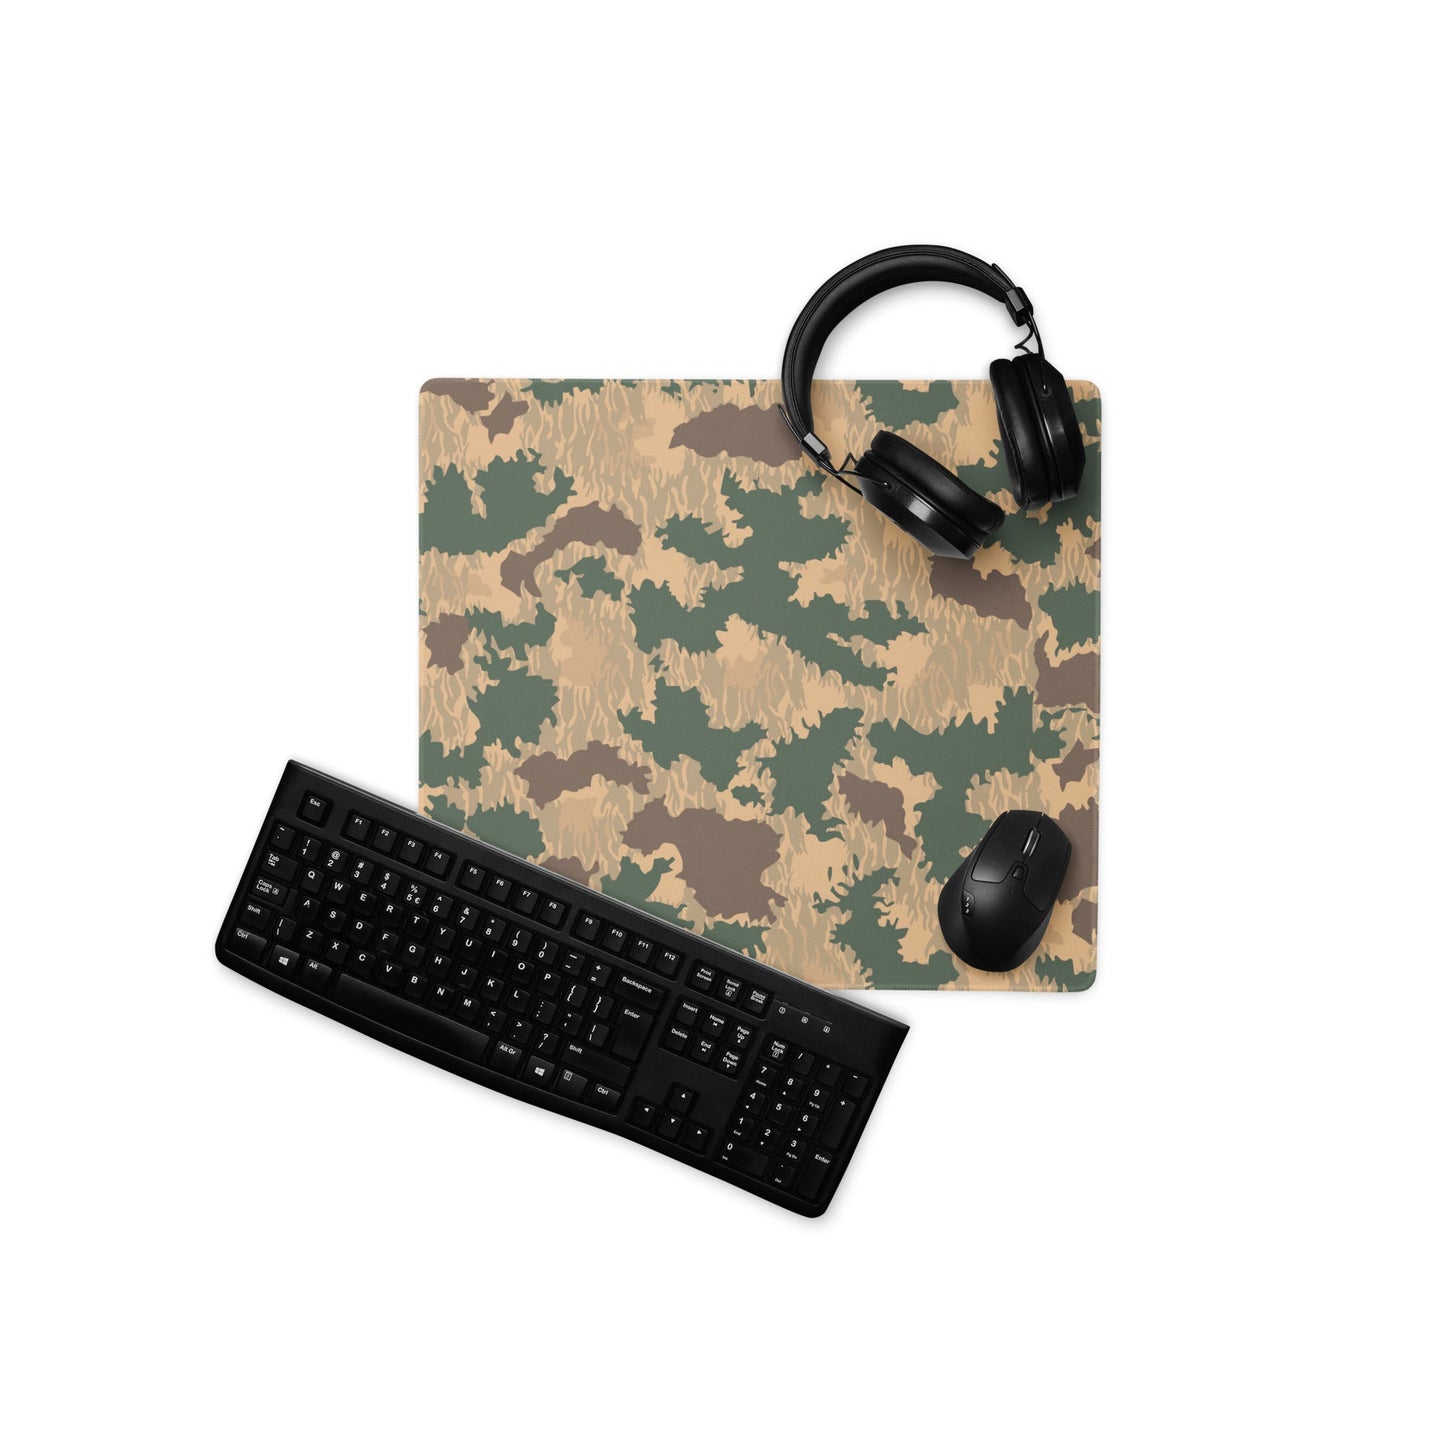 South African Police Pinwheel CAMO Gaming mouse pad - 18″×16″